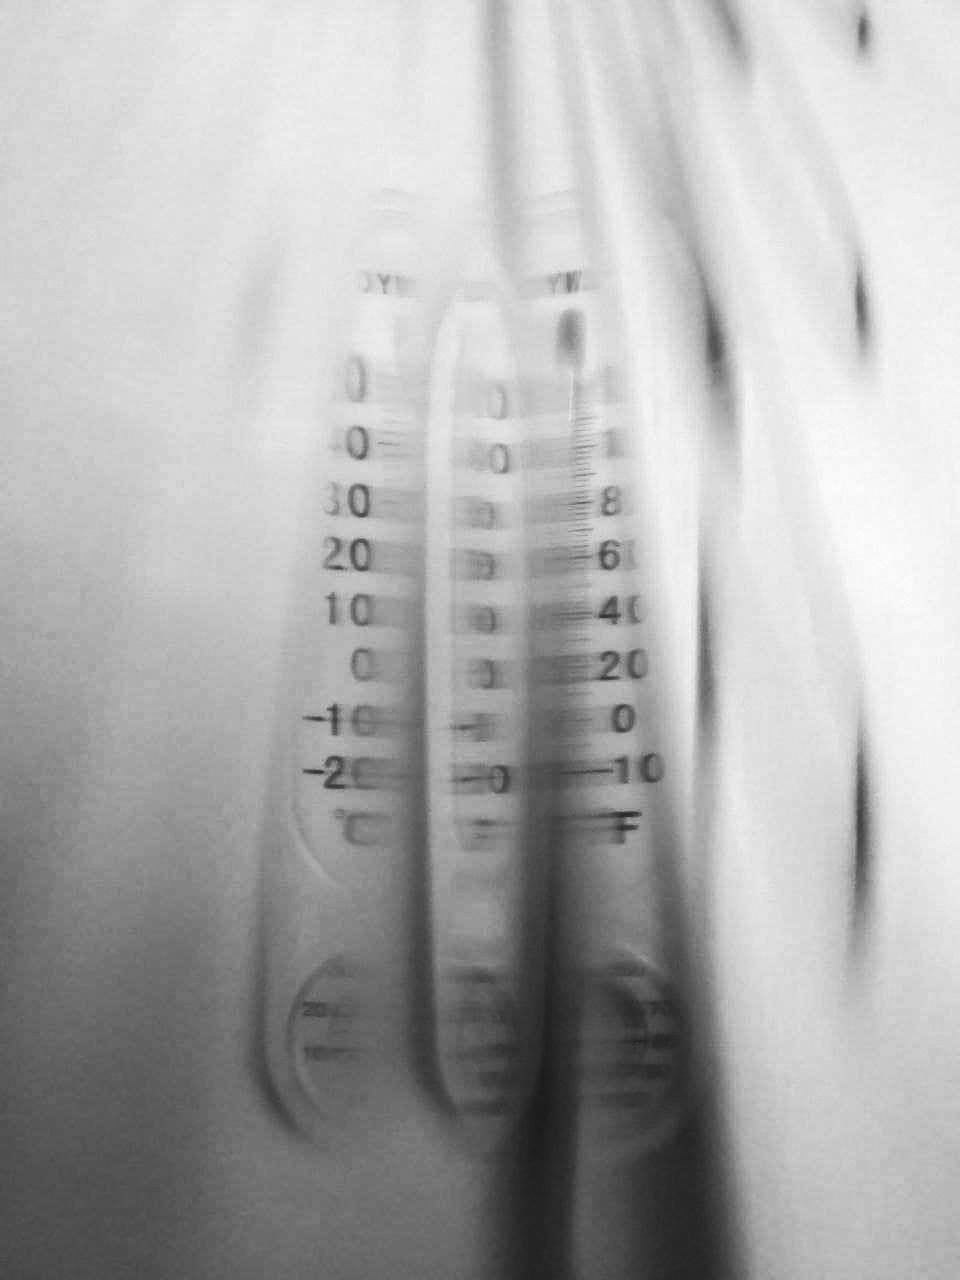 black and white, white, arm, close-up, hand, monochrome photography, healthcare and medicine, indoors, monochrome, number, instrument of measurement, thermometer, accuracy, eyelash